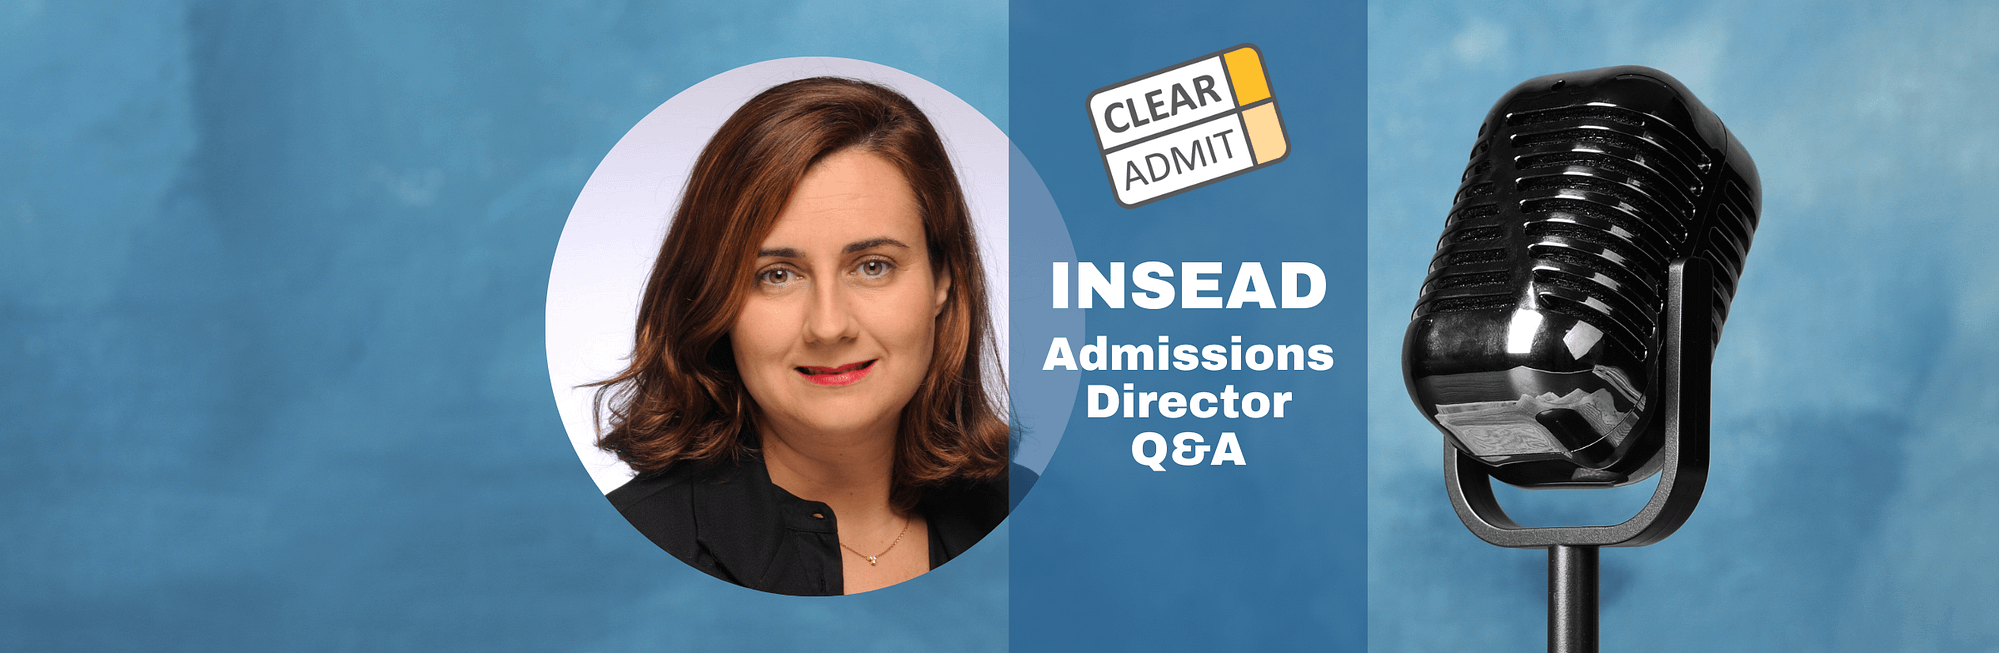 insead admissions